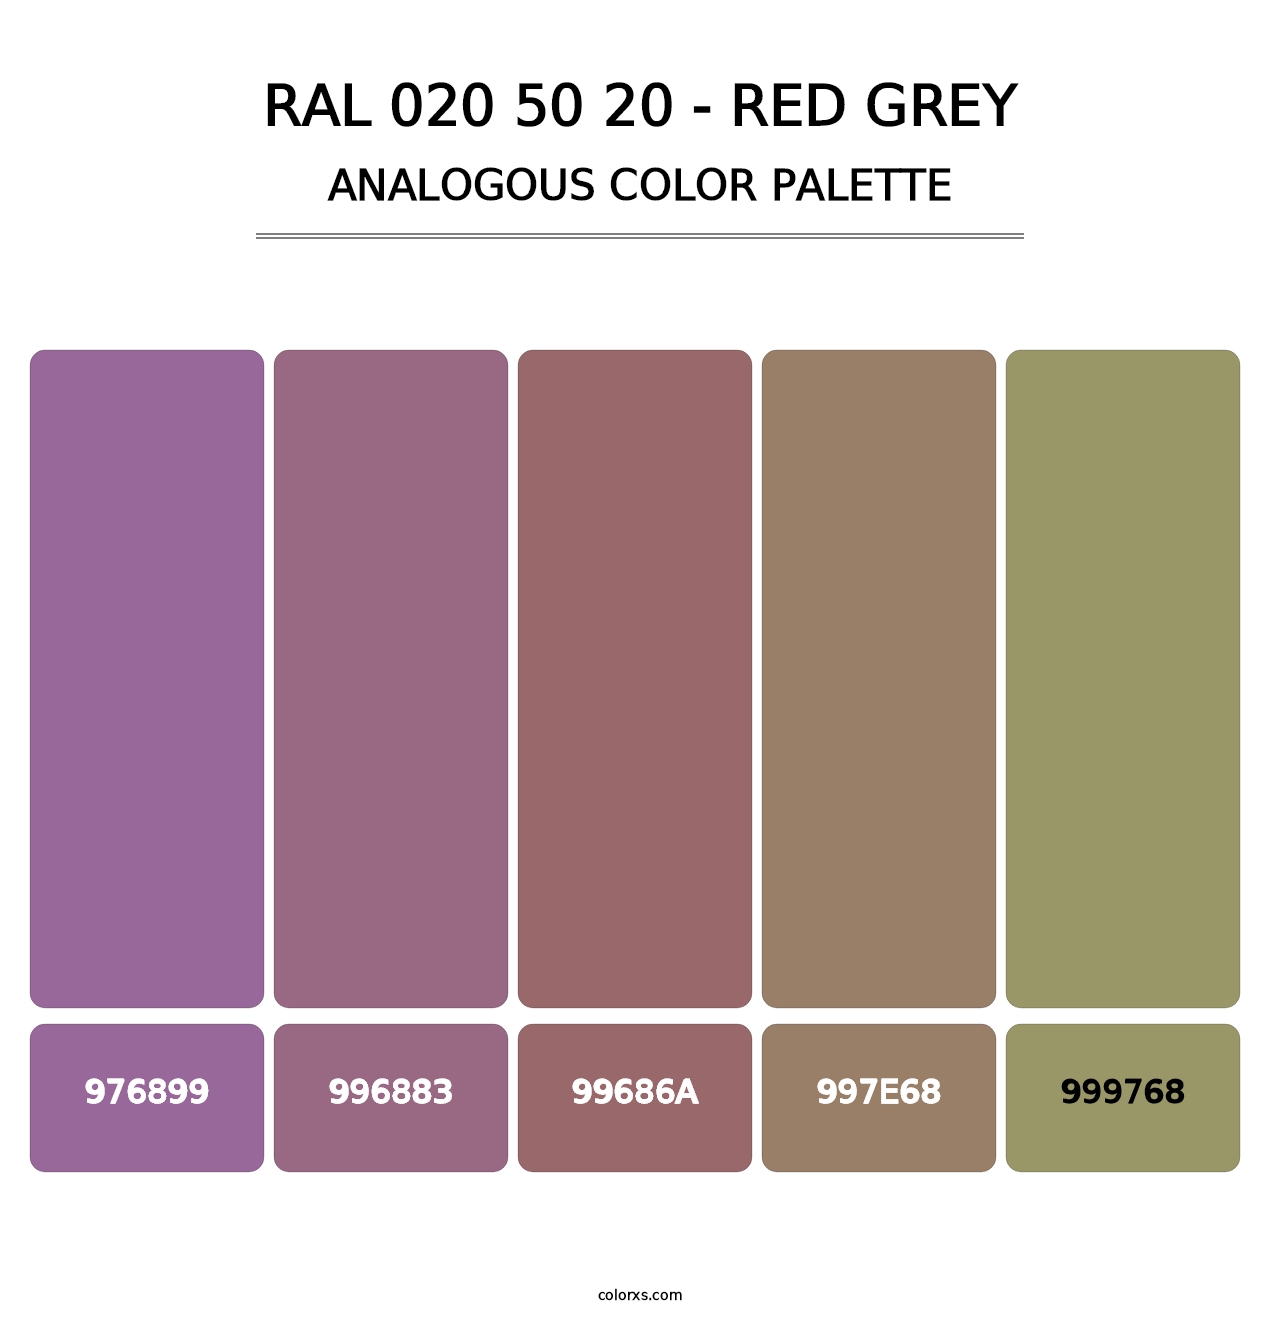 RAL 020 50 20 - Red Grey - Analogous Color Palette